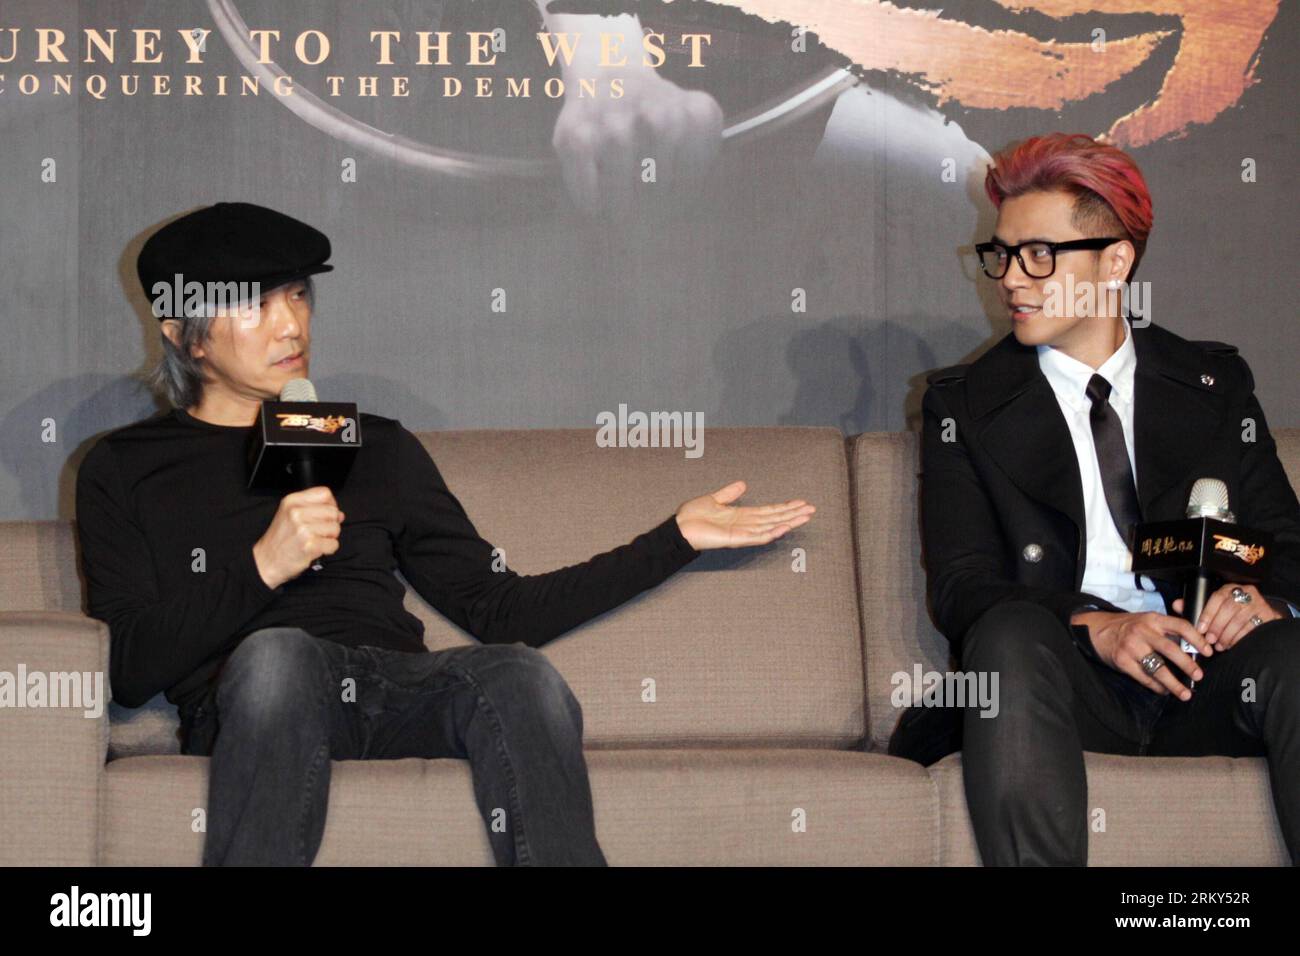 Bildnummer: 59146048  Datum: 28.01.2013  Copyright: imago/Xinhua (130128) -- TAIPEI, Jan. 28, 2013 (Xinhua) -- Director Stephen Chow (L) and actor Show Lo receive interview during a press conference of the movie Journey to the West: Conquering the Demons in Taipei, southeast China s Taiwan, Jan. 28, 2013. The movie is expected to hit the screen on Feb. 7, 2013 in Taipei. (Xinhua) (mp) CHINA-TAIPEI-MOVIE-PRESS CONFERENCE (CN) PUBLICATIONxNOTxINxCHN Entertainment Kultur People PK Film Premiere Filmpremiere Die Reise nach Westen x0x xdd 2013 quer      59146048 Date 28 01 2013 Copyright Imago XINH Stock Photo